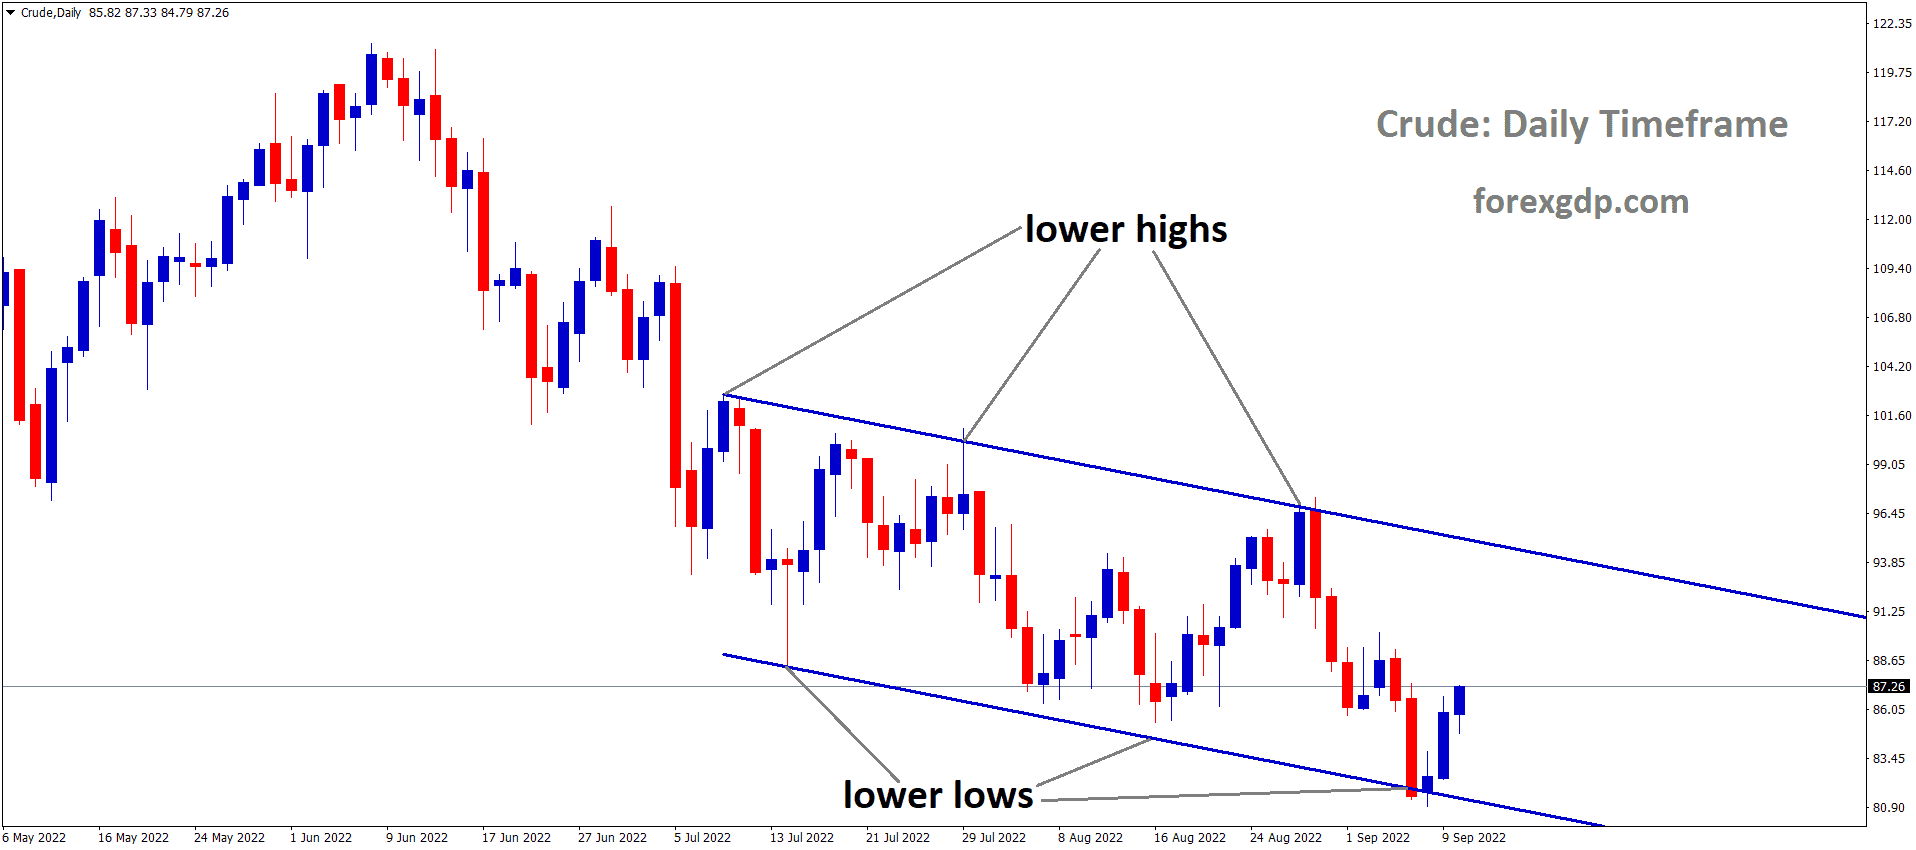 Crude Oil is moving in the Descending channel and the market has rebounded from the lower low area of the channel